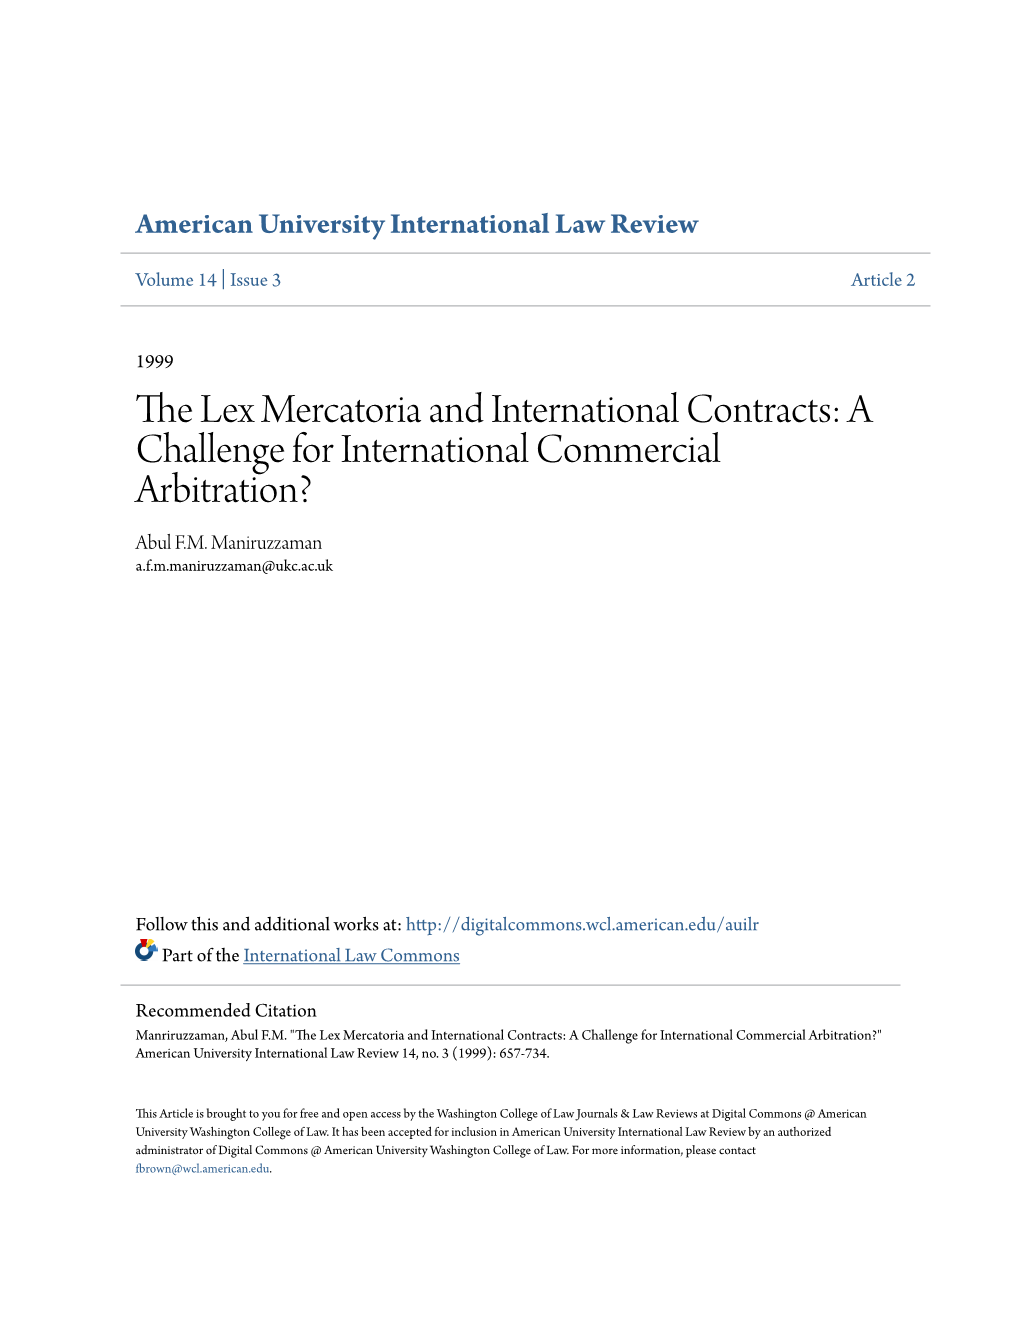 The Lex Mercatoria and International Contracts: a Challenge for International Commercial Arbitration?" American University International Law Review 14, No